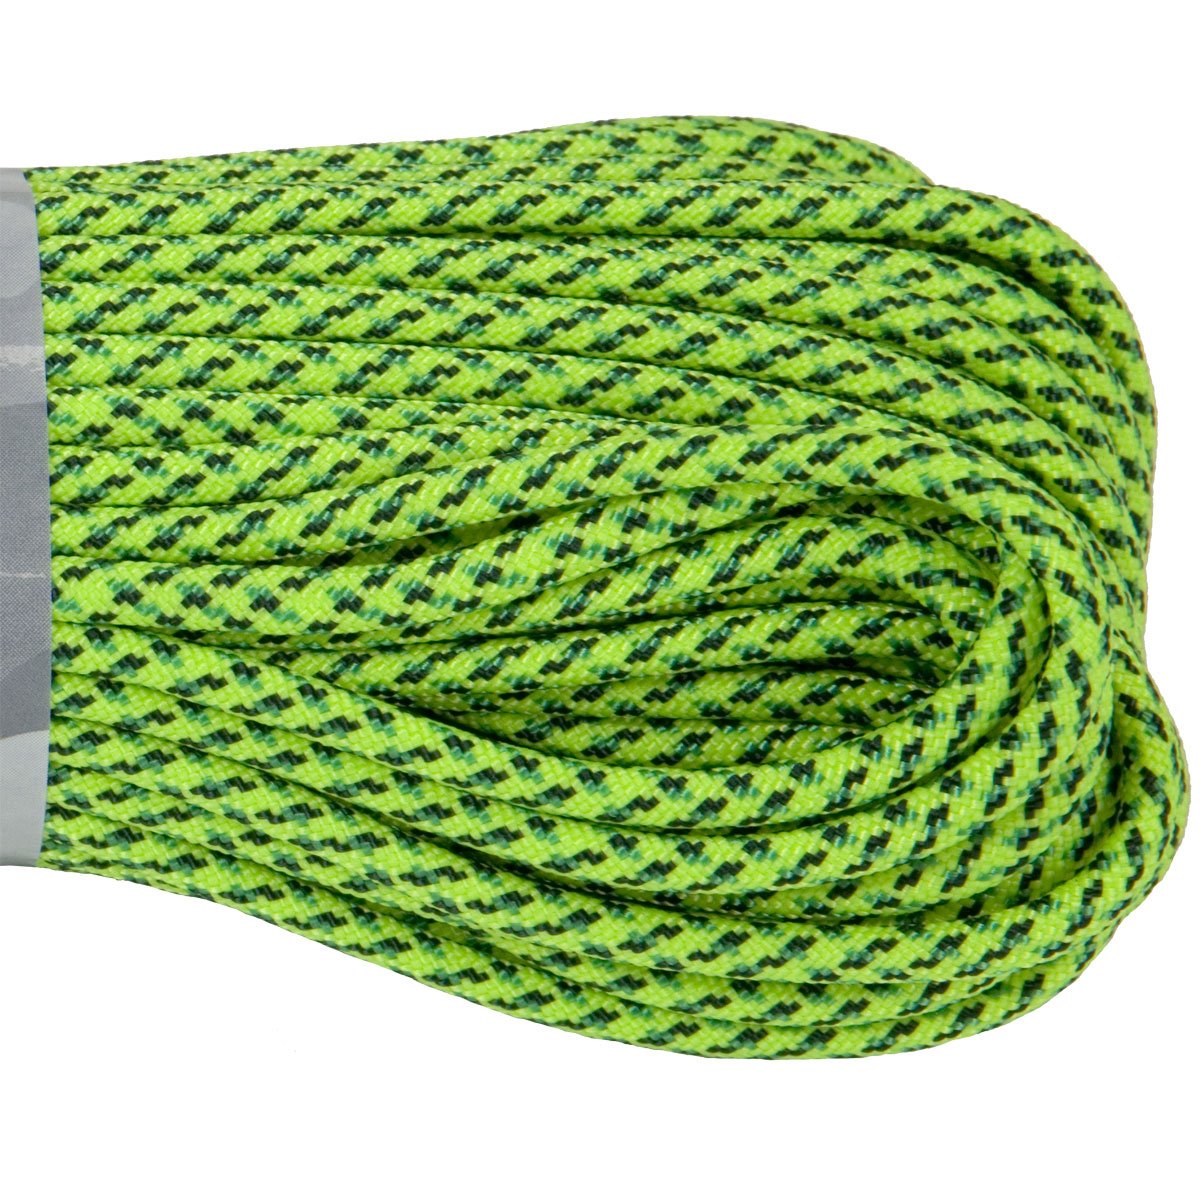 Atwood 550 Paracord - Green Spec Camo